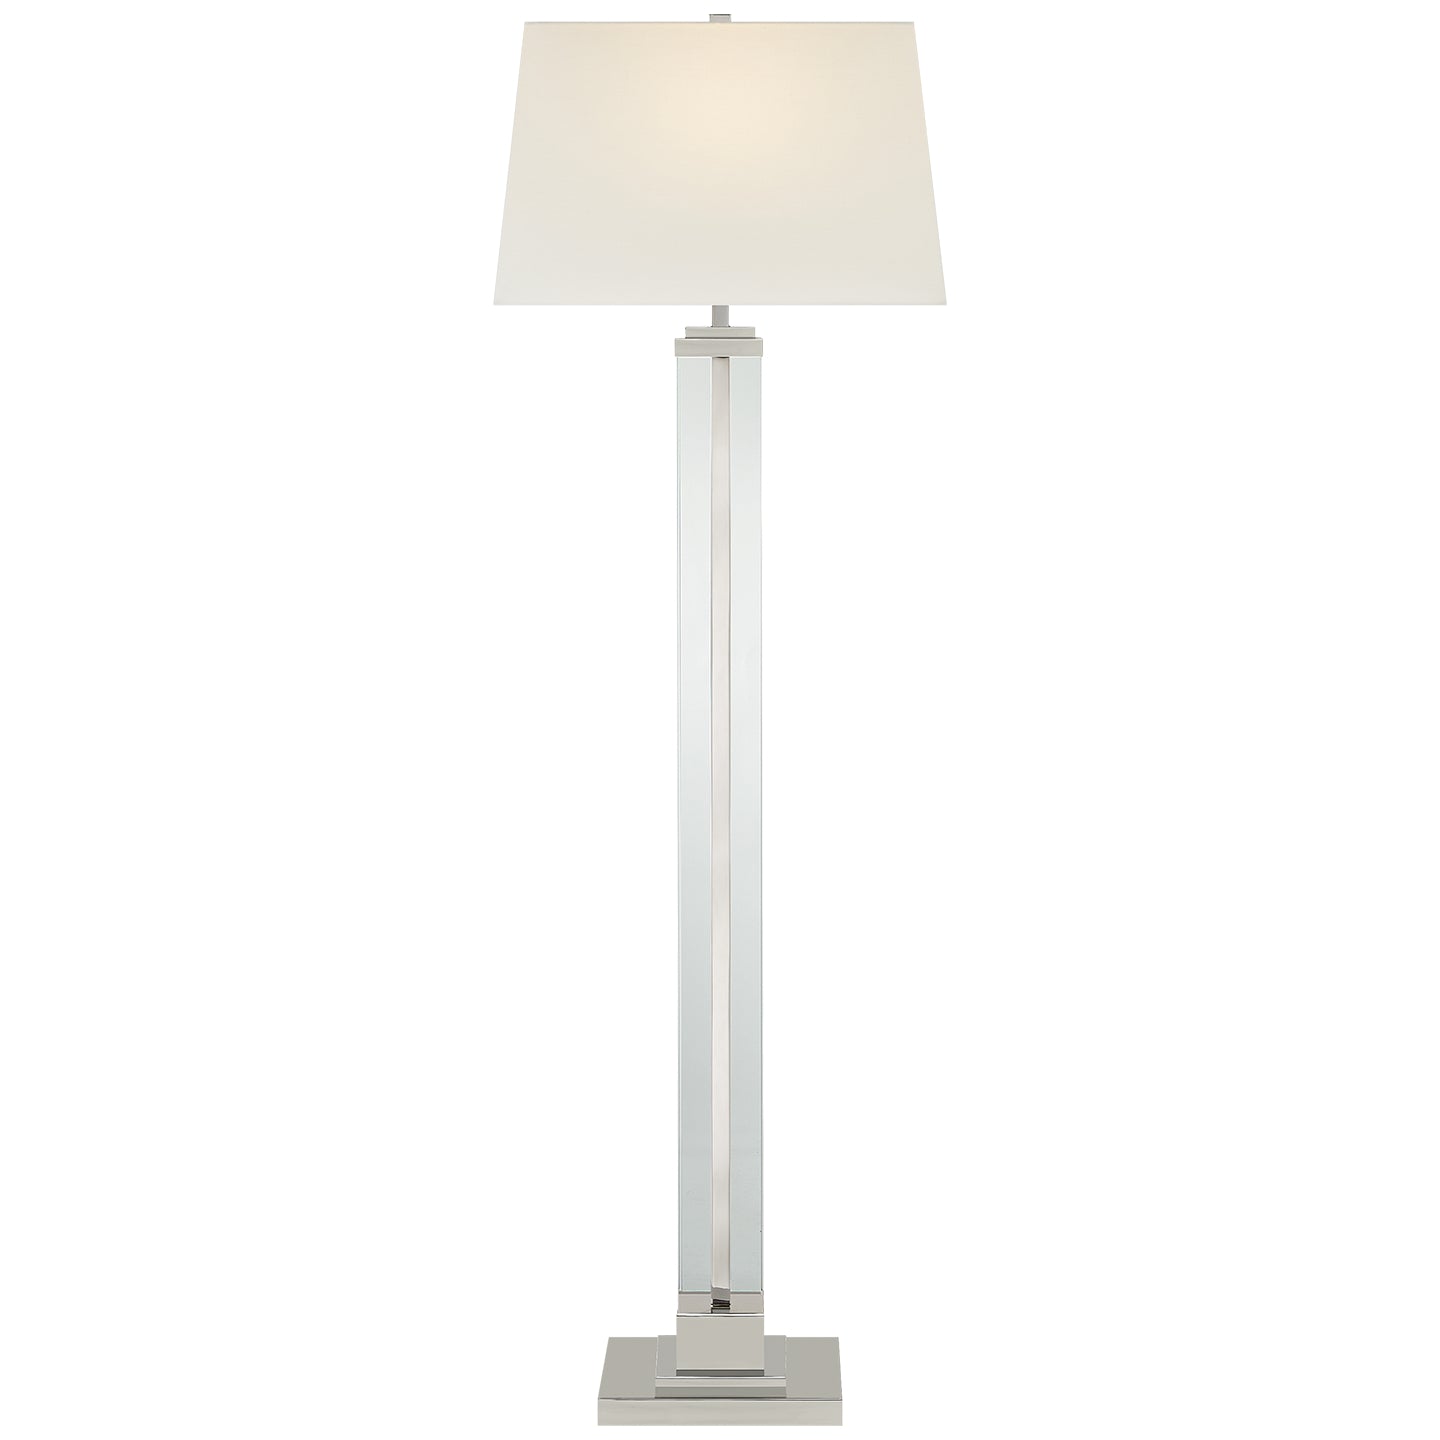 One Light Floor Lamp from the Wright collection in Polished Nickel finish